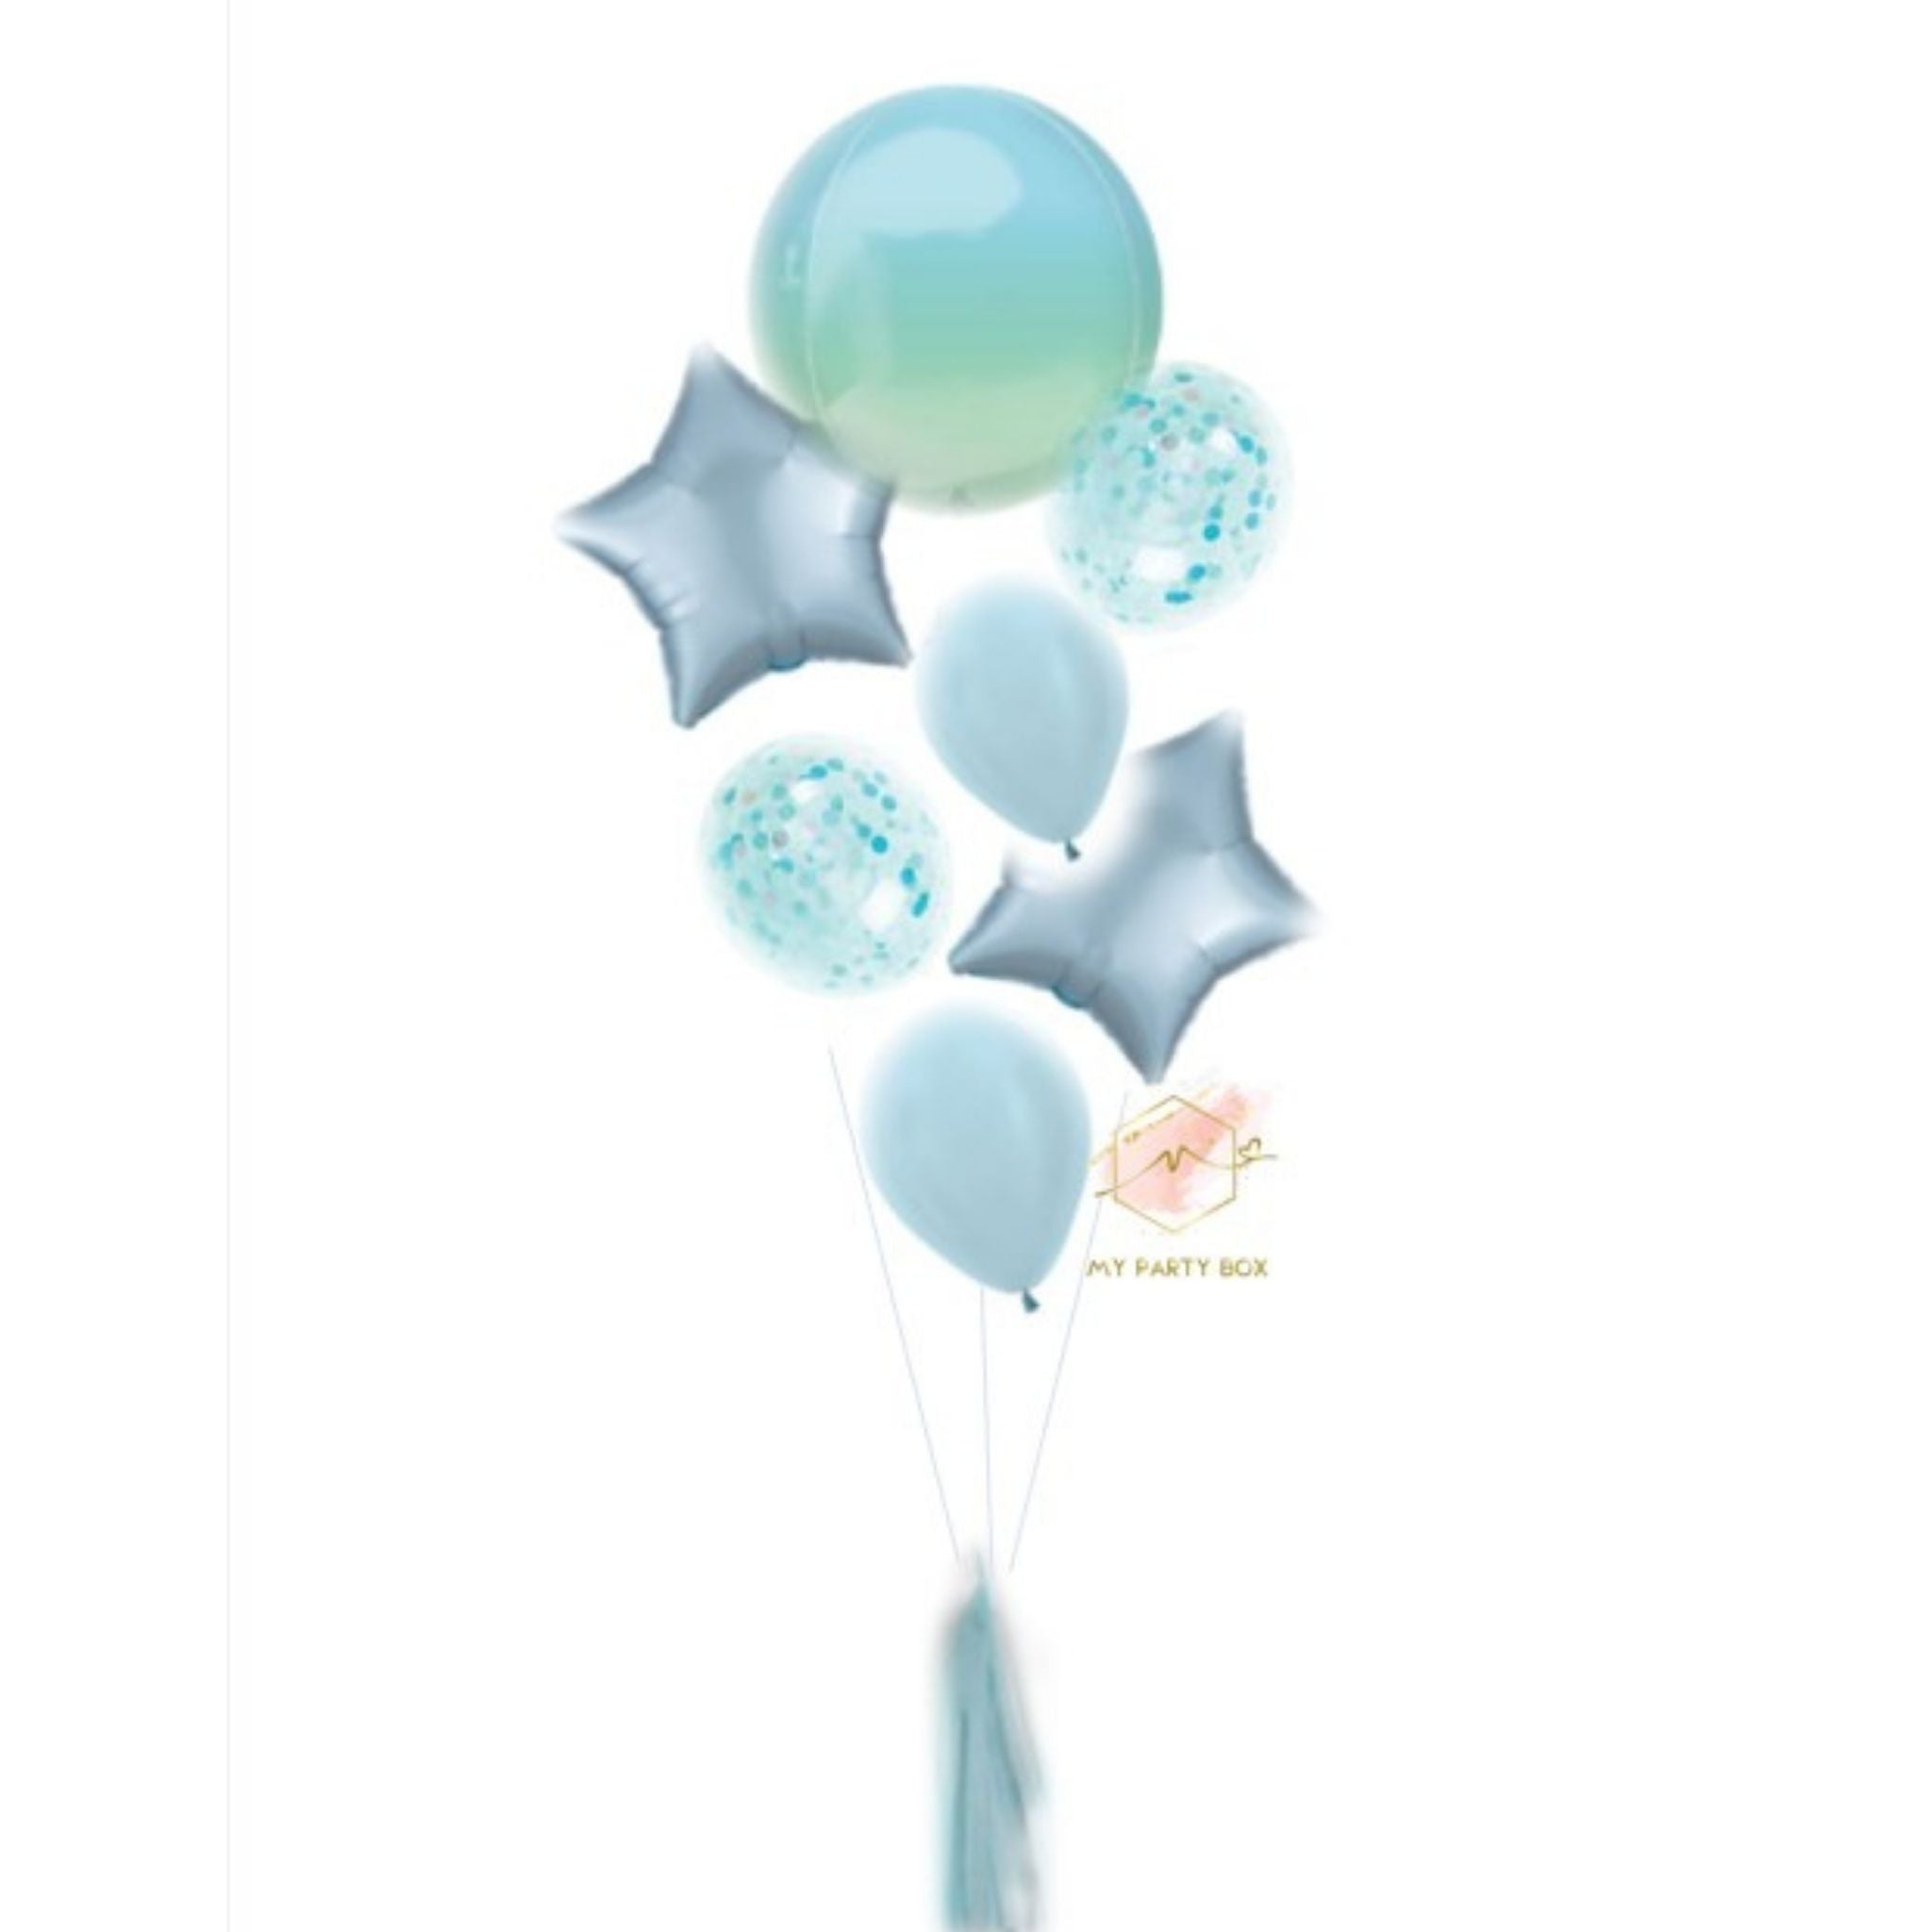 My Party Box Blue and Green Deluxe Balloon Bouquet with Orbz balloons, starts balloons, satin blue balloons and blue confetti balloons